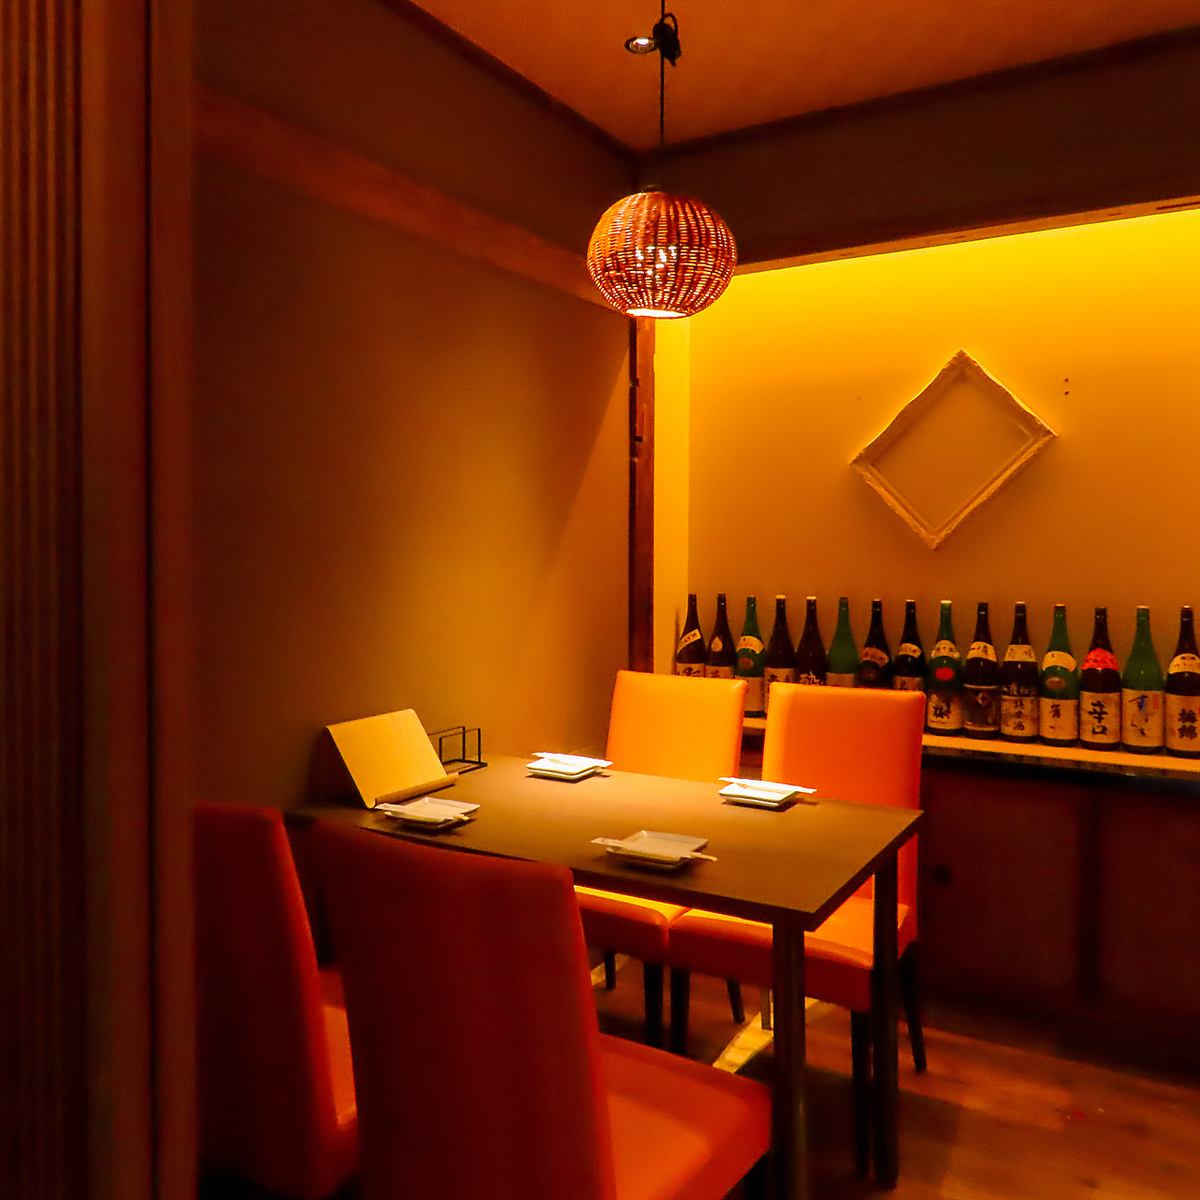 Enjoy delicious food in a completely private room, perfect for a girls' night out!